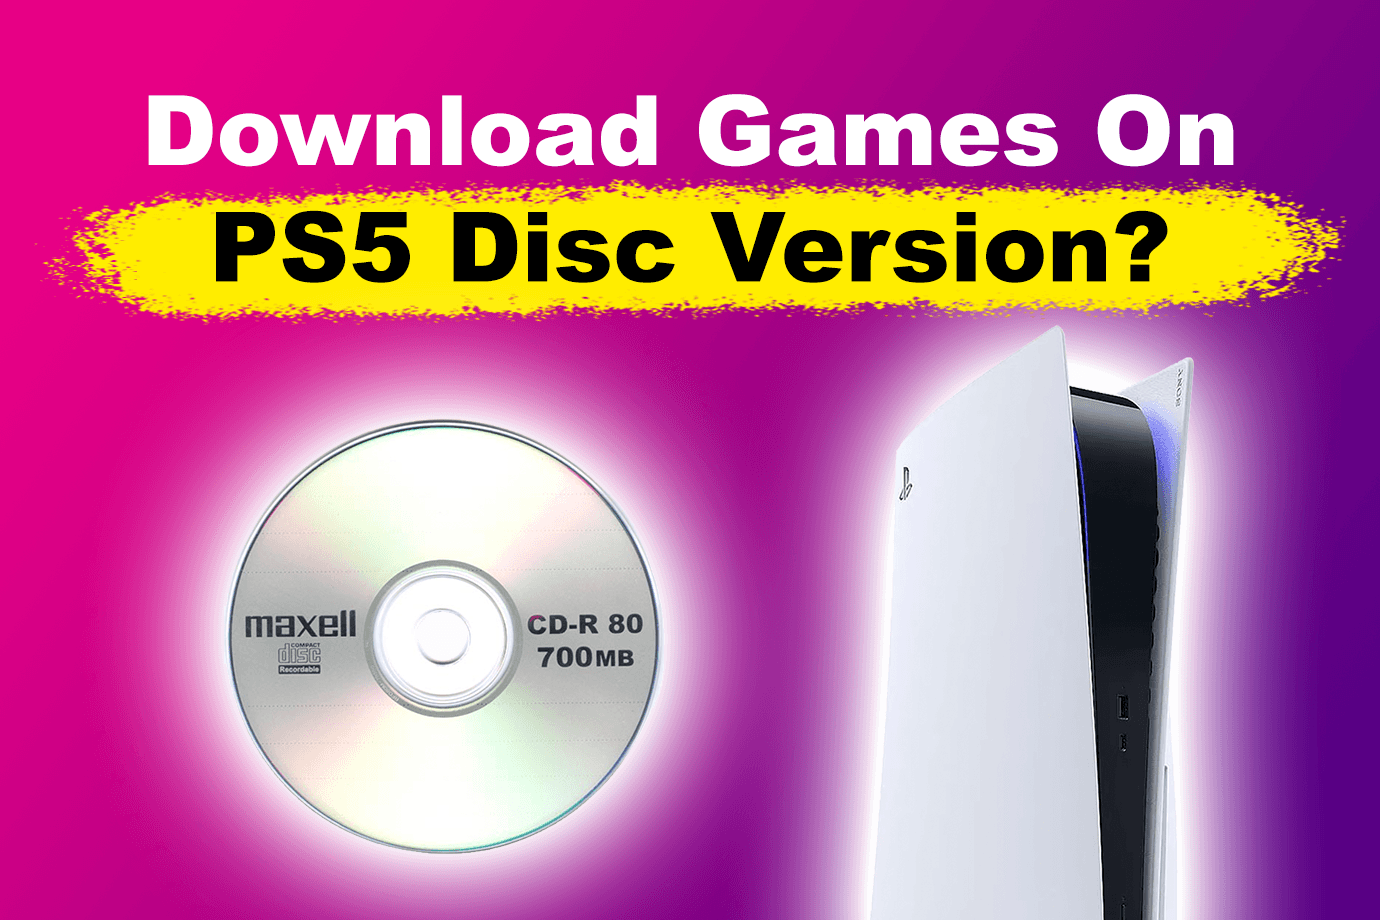 Can You Download Games on PS5 Disc Version? [How to Do It]